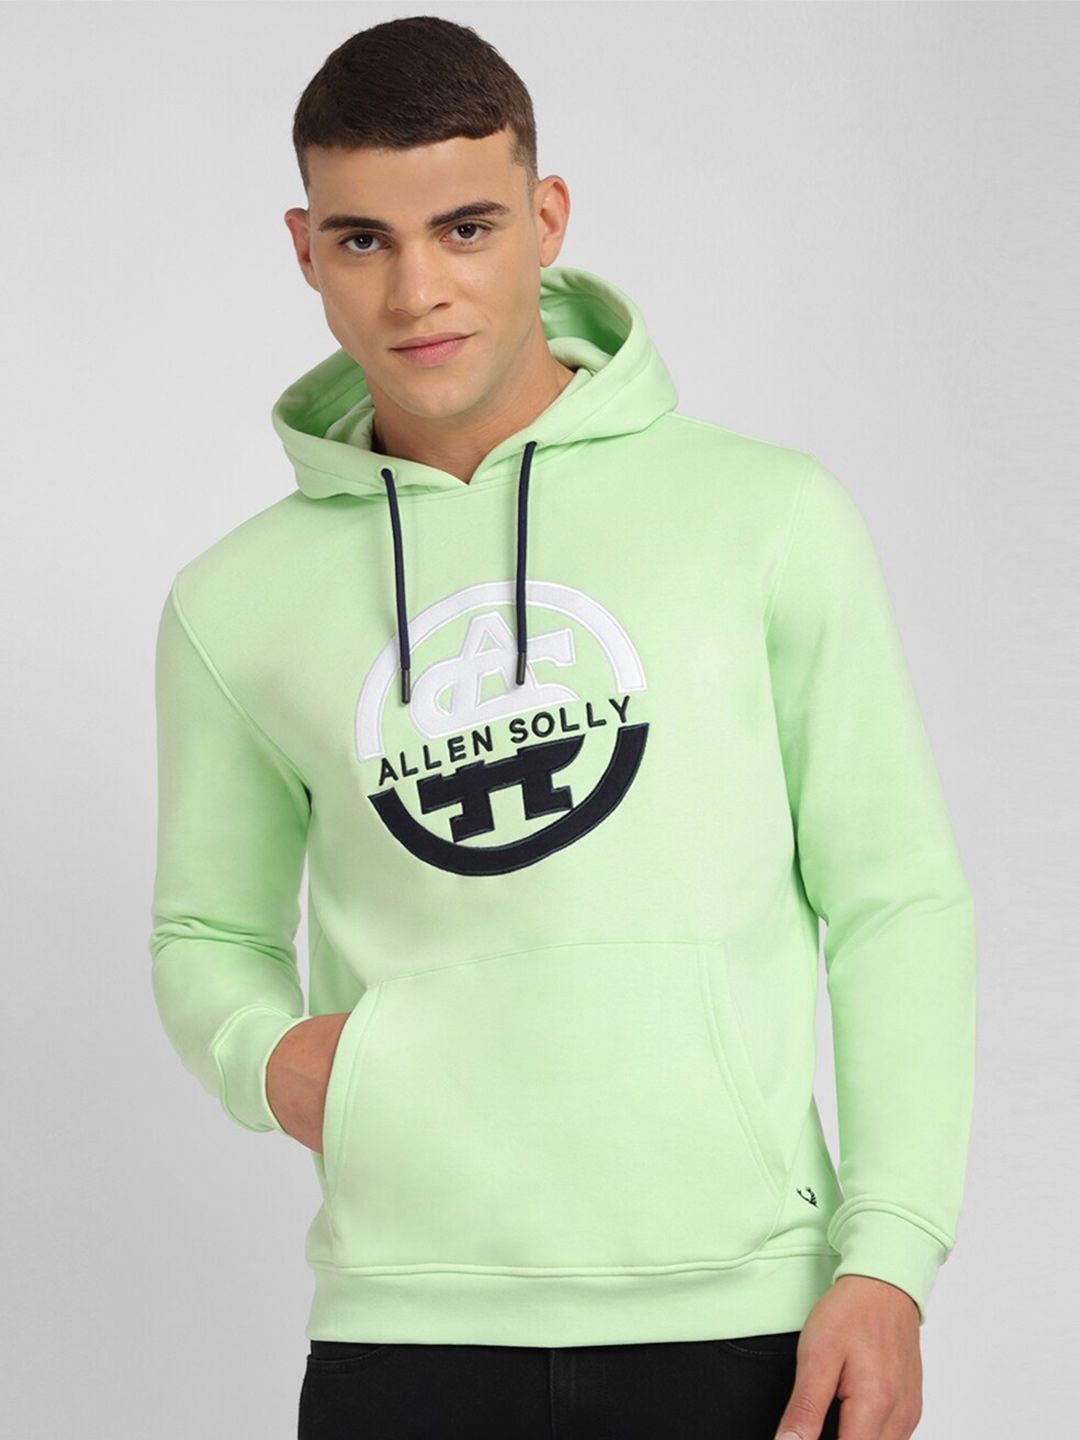 allen solly typography embroidered hooded cotton pullover sweatshirt